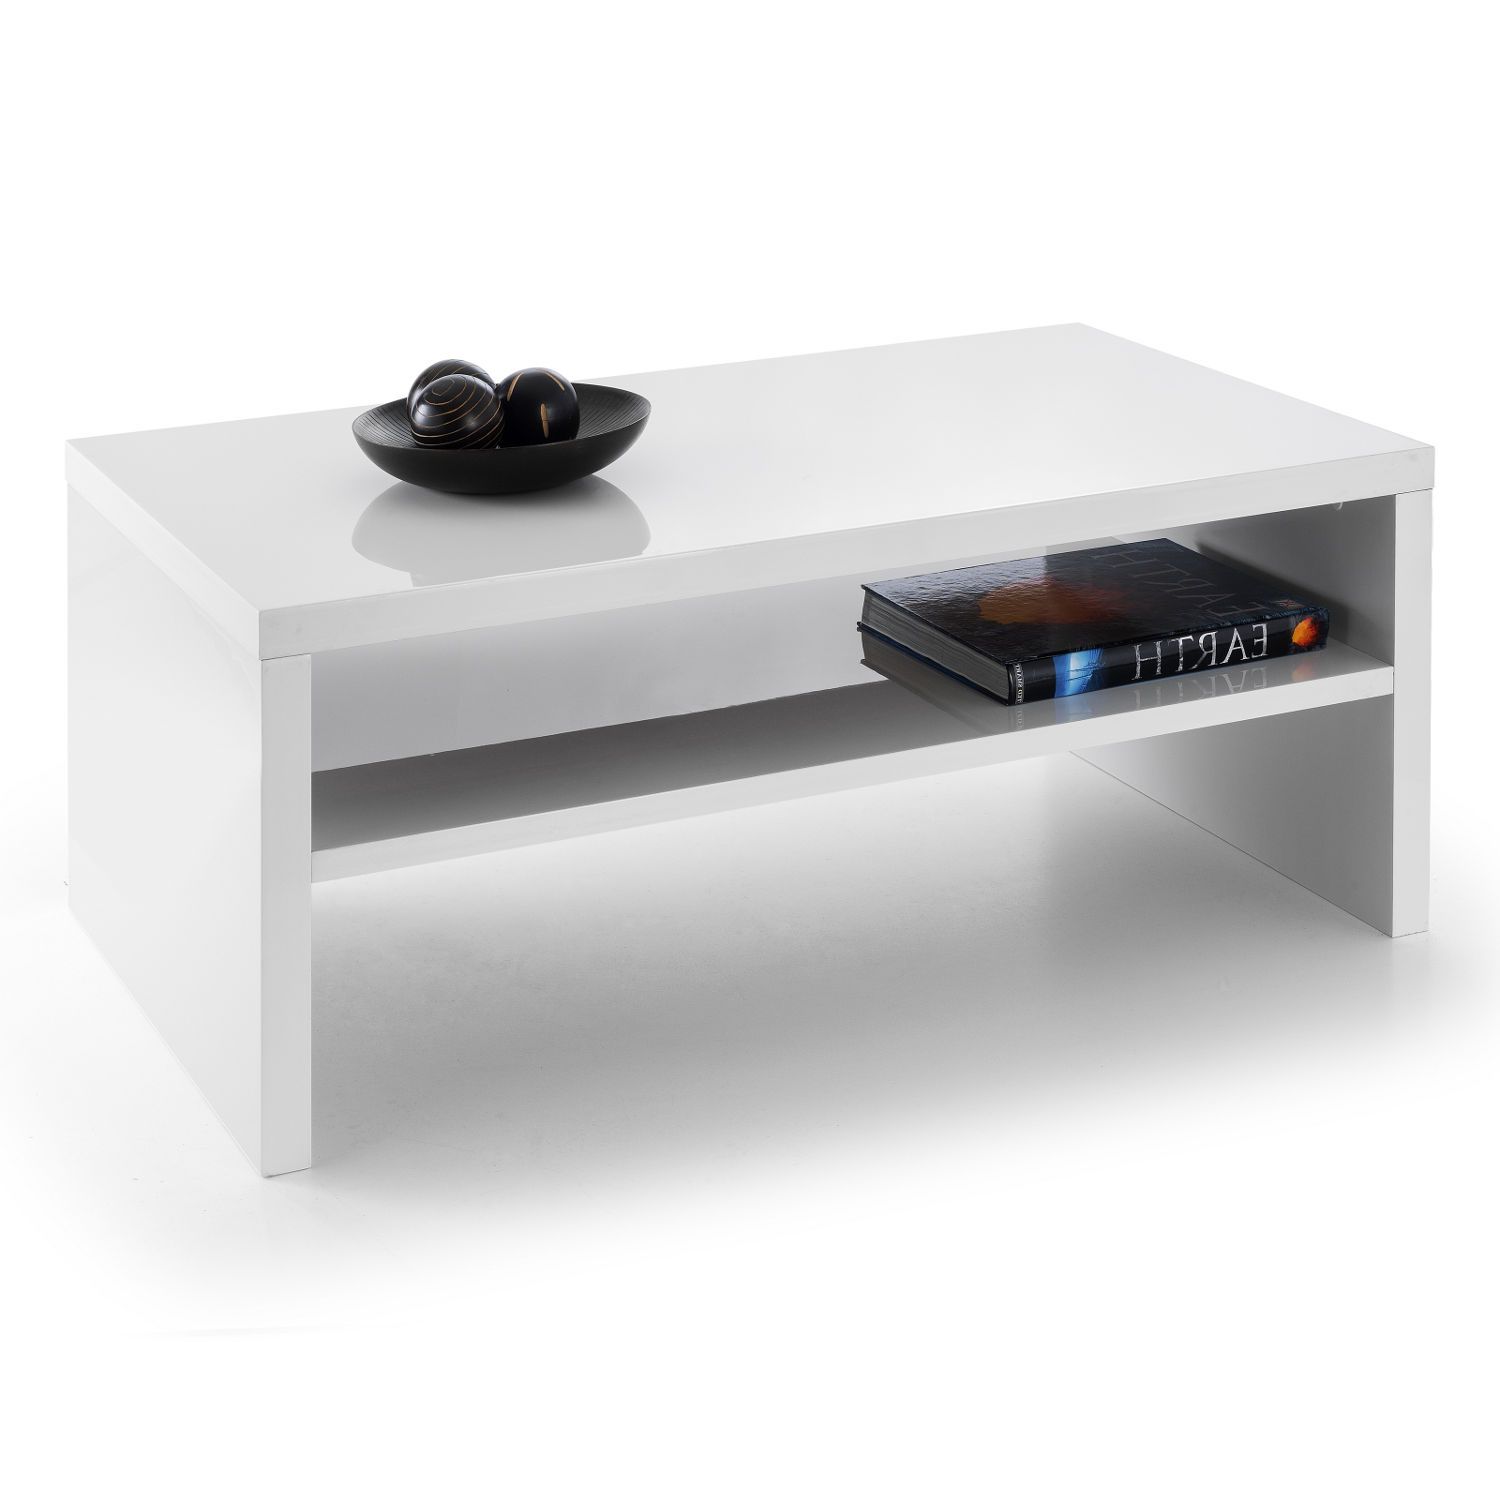 10 Grey High Gloss Coffee Table Inspiration Intended For White Gloss And Maple Cream Coffee Tables (View 9 of 15)